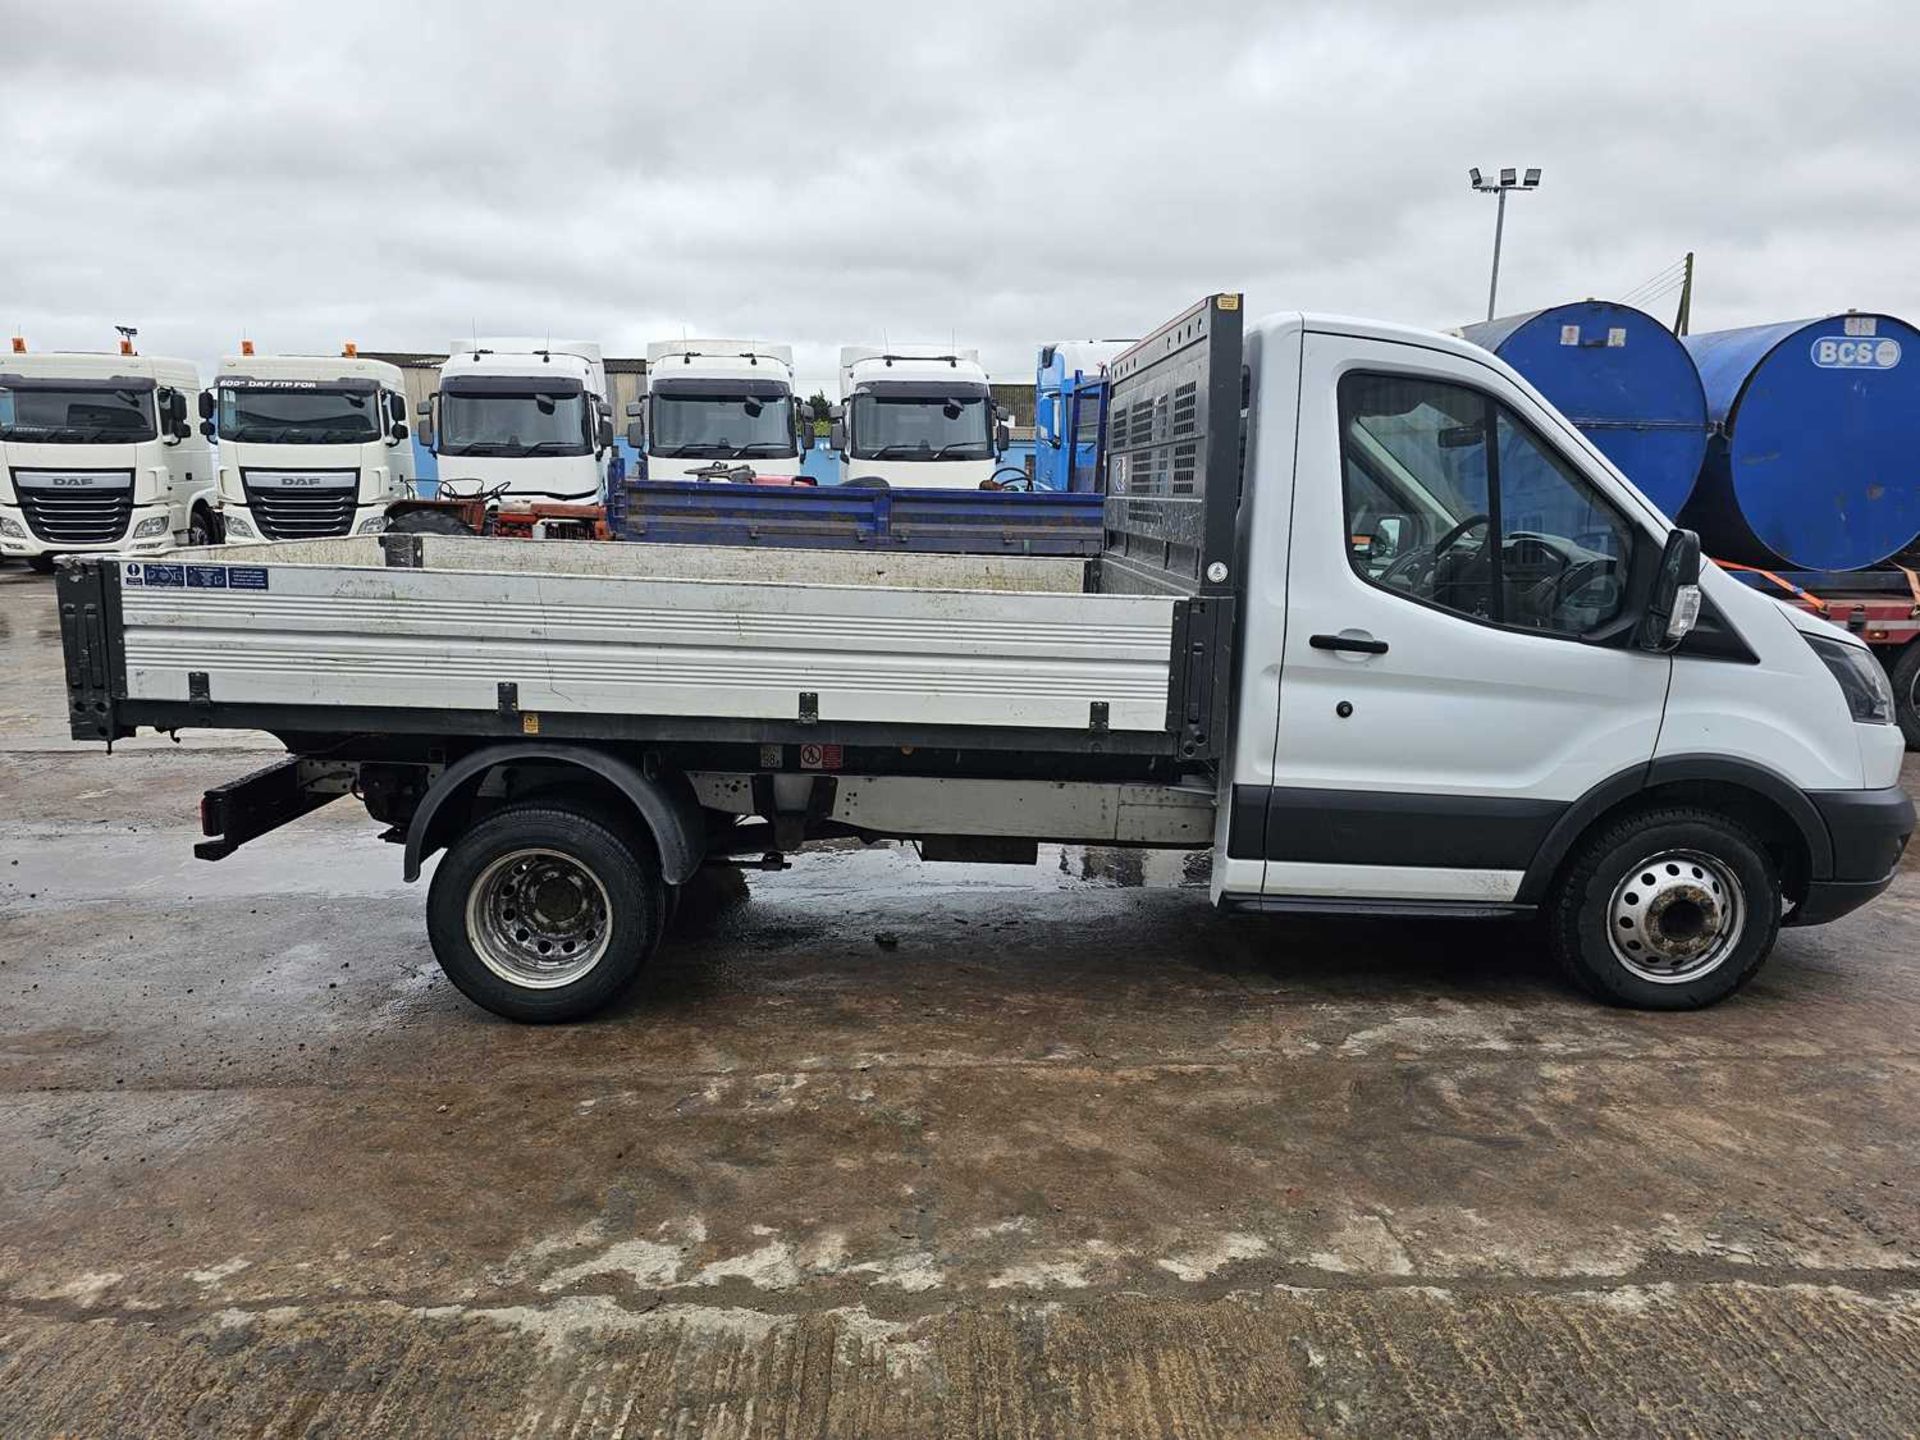 2016 Ford Transit 350 Ecoblue RWD 6 Speed Drop Side Tipper - Image 7 of 24